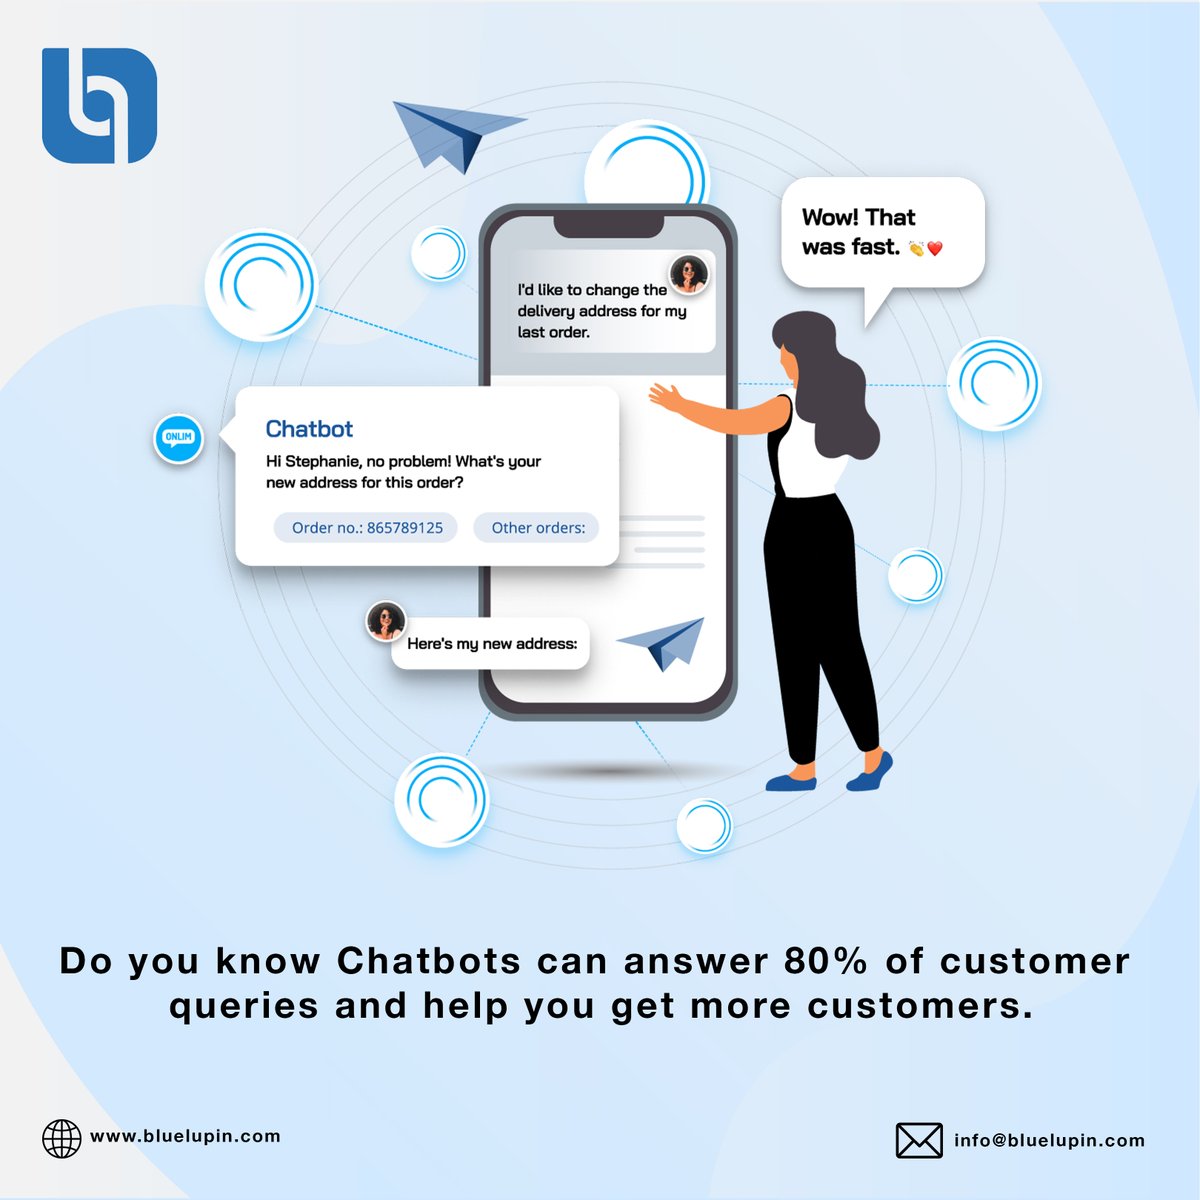 Your business also needs a chatbot, Connect with the Bluelupin Team to get your customized chatbot developed.

#bluelupin #Chatbot #servies #serviceoffered #customizedservices